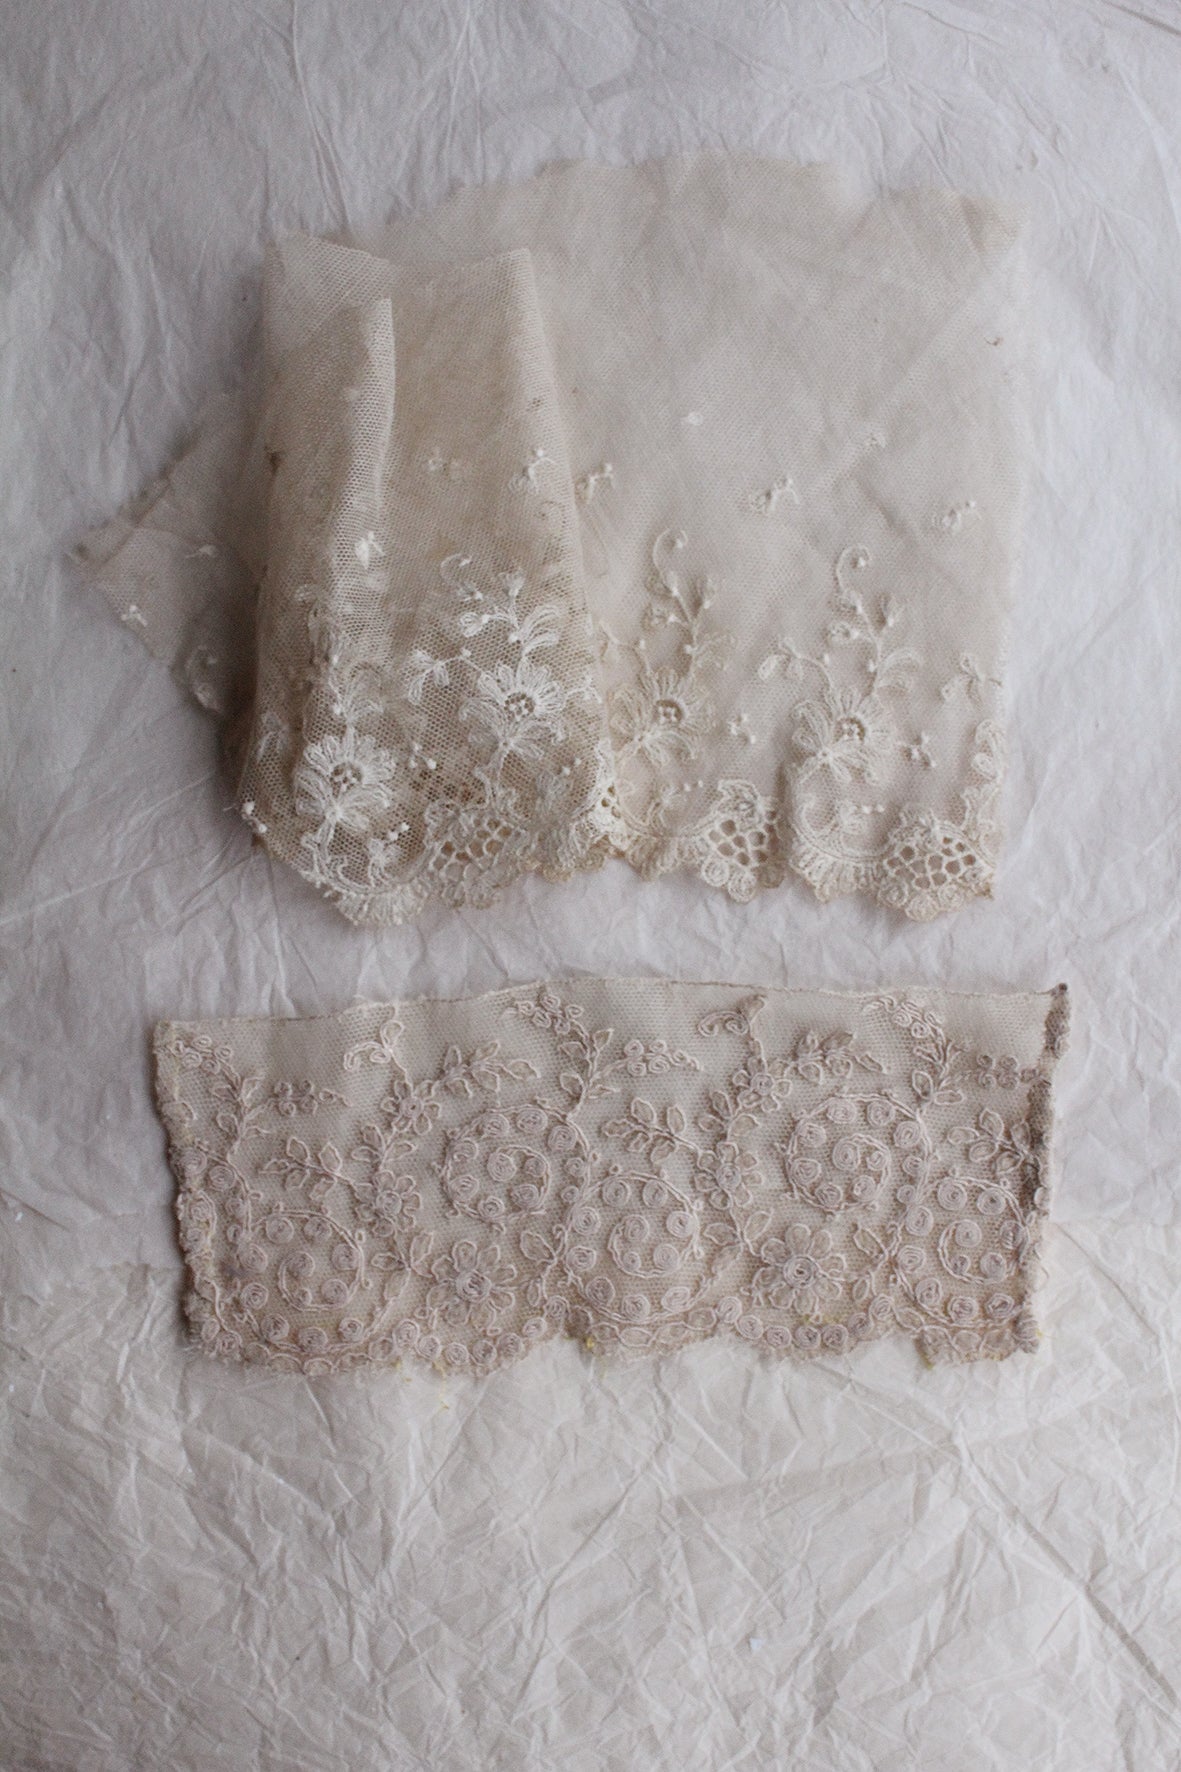 Collection of Antique Lace Samples - B2